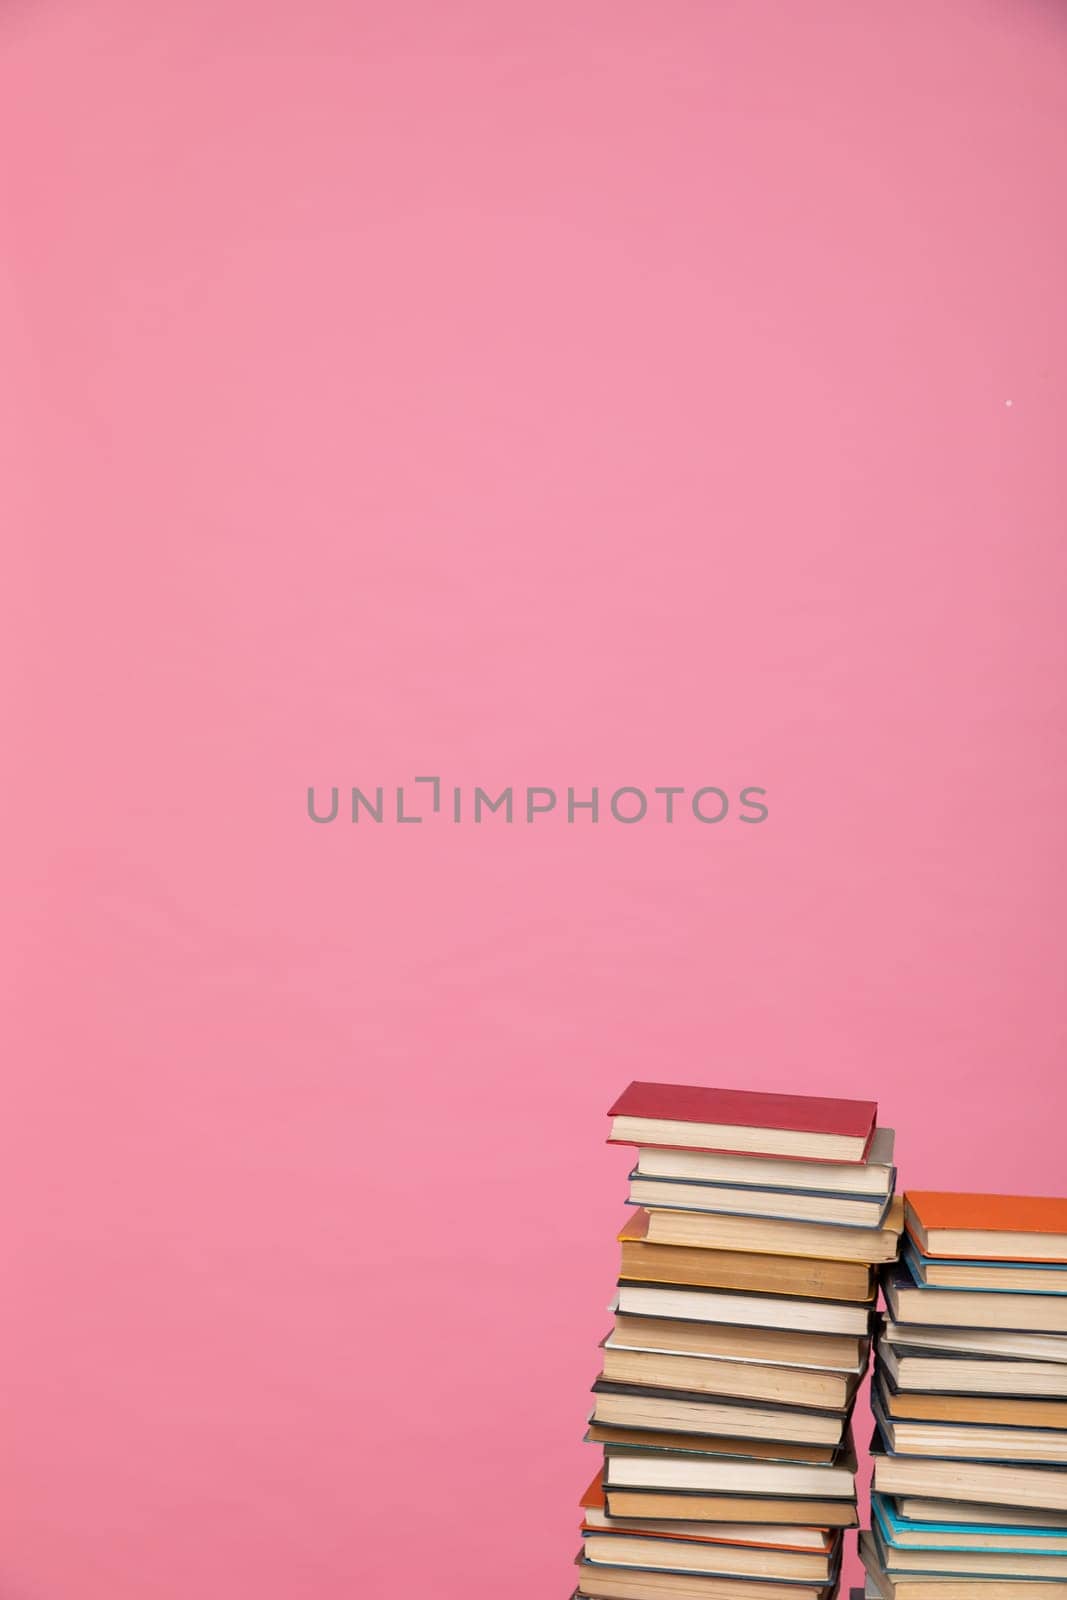 science education stack of books on pink background literacy training by Simakov